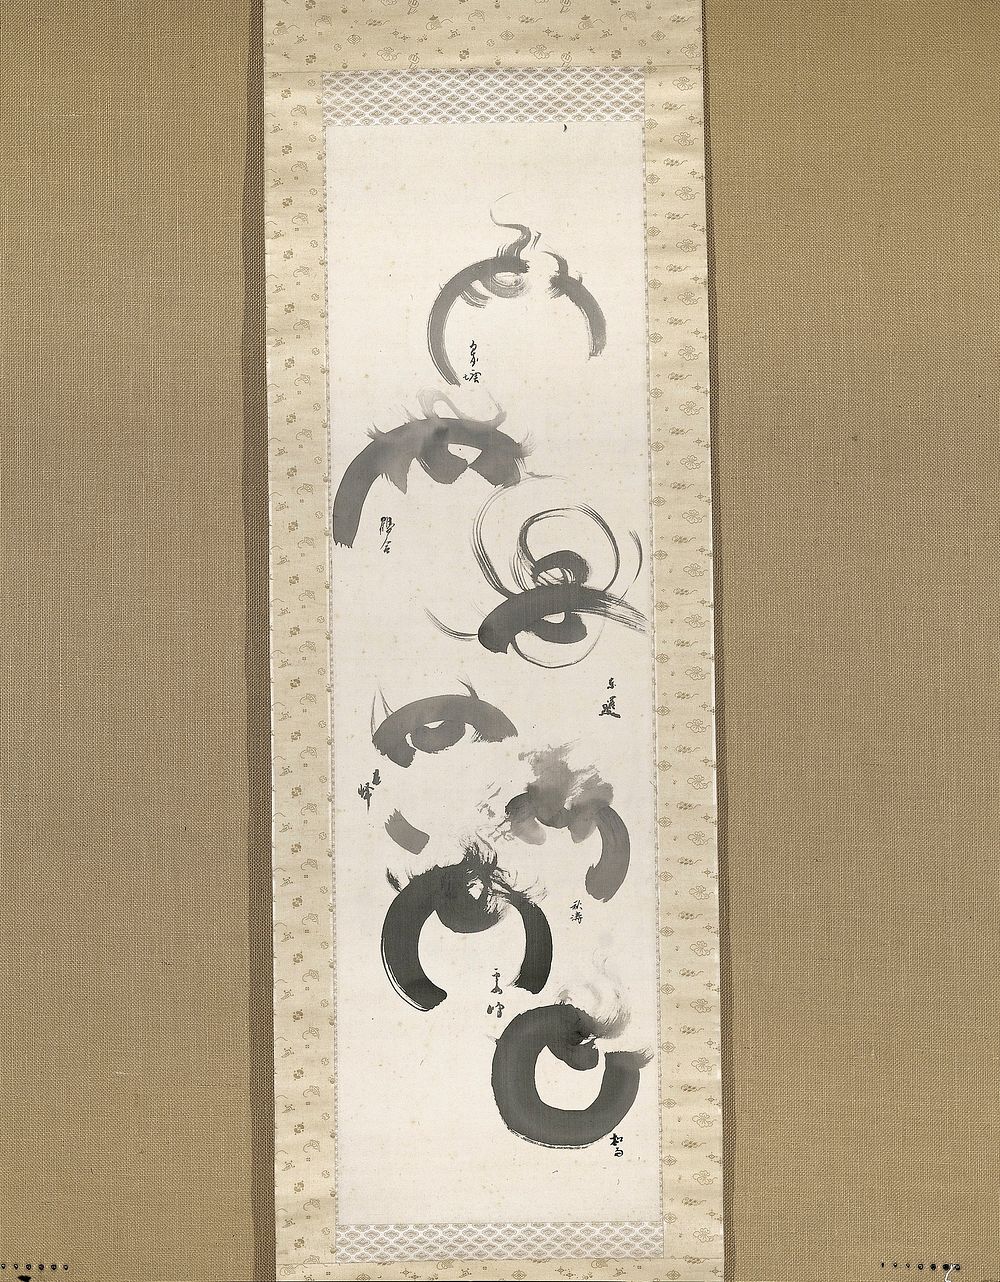 Seven eye-like figures arranged vertically down scroll; collaborative painting. Original from the Minneapolis Institute of…